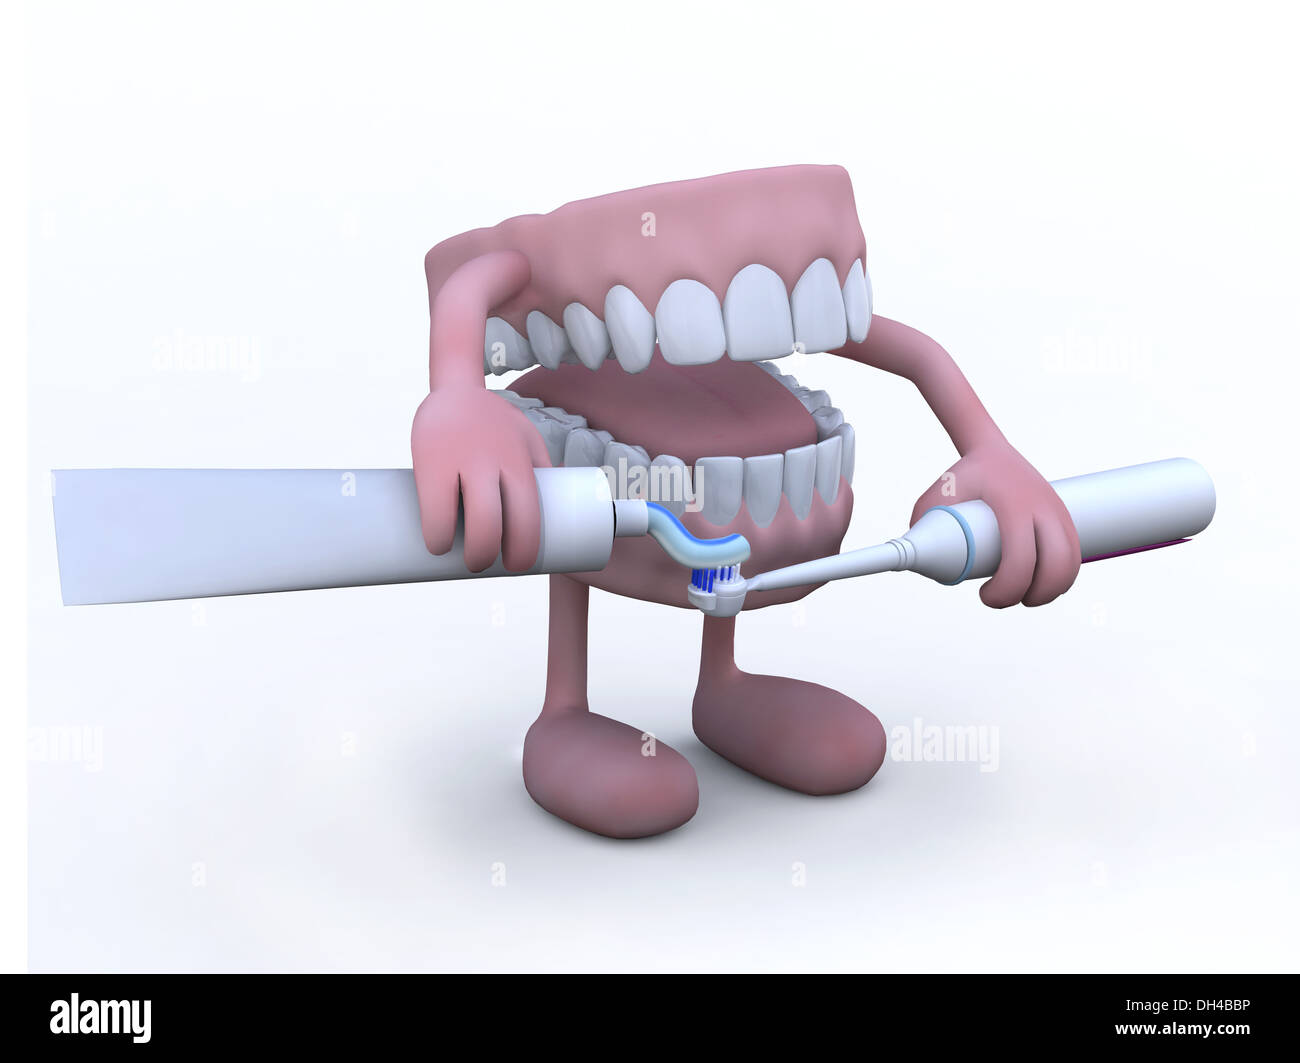 open denture with arms, legs and toothpaste tube and electric toothbrush, 3d illustration Stock Photo